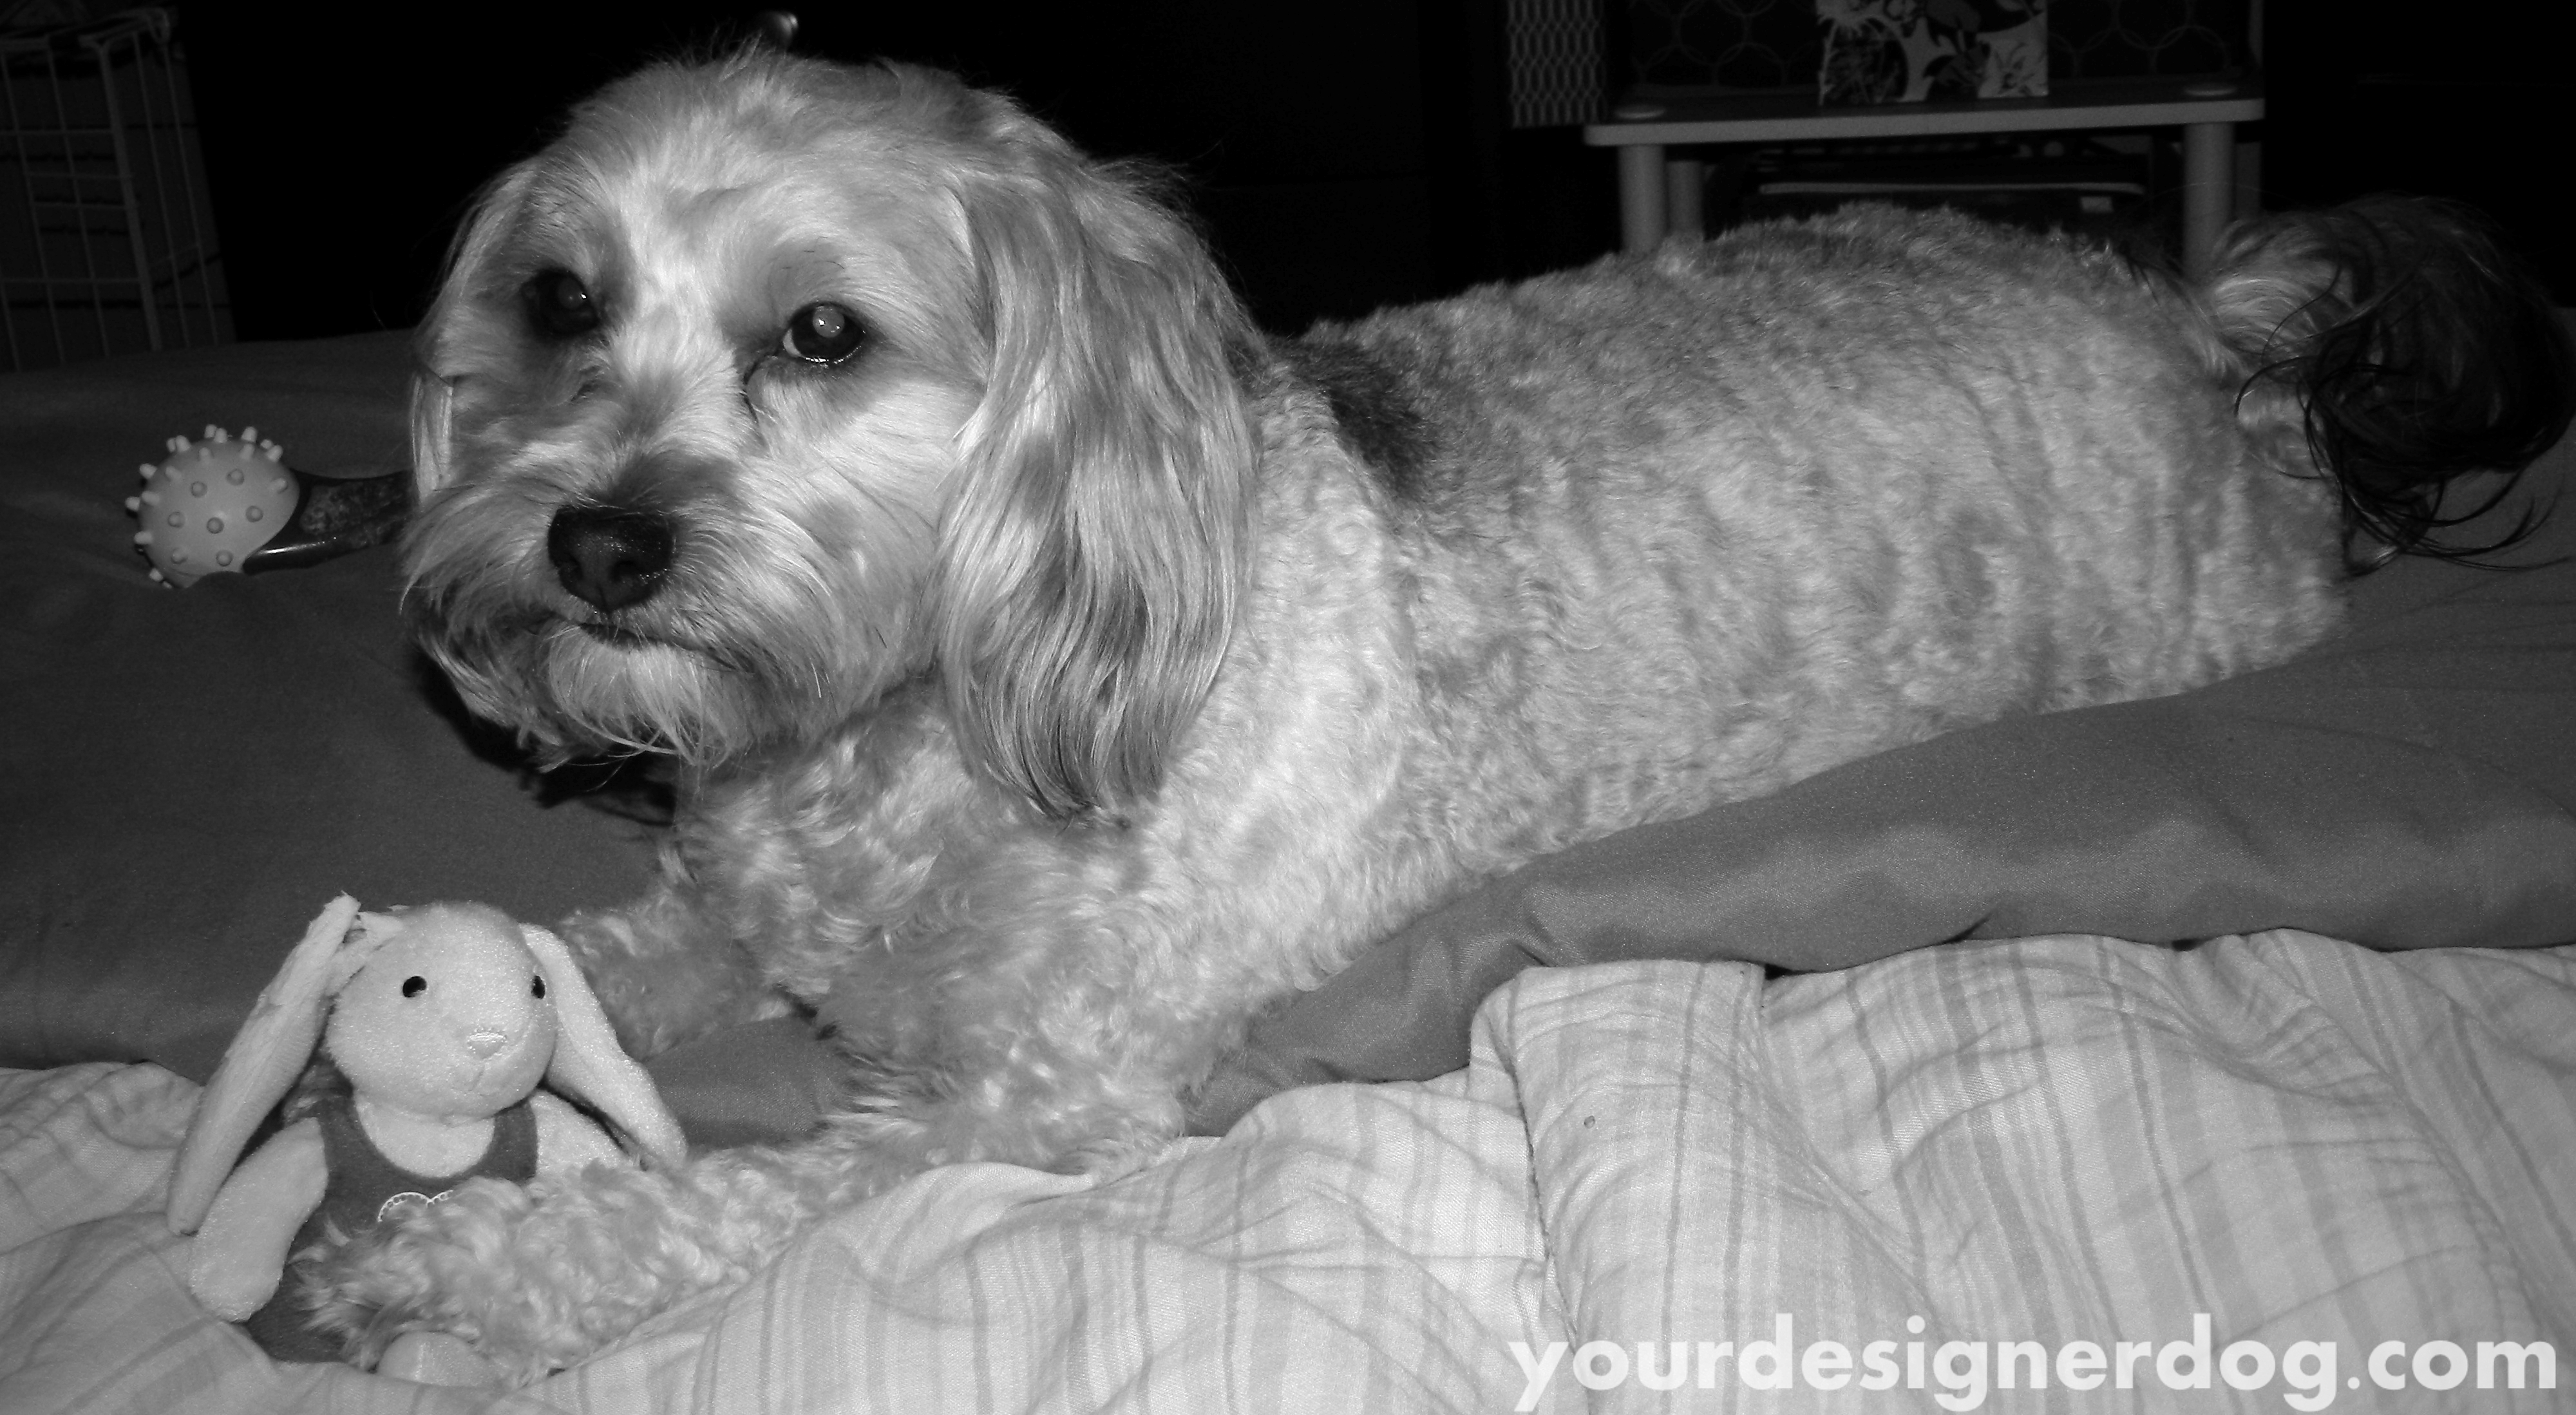 dogs, designer dogs, yorkipoo, yorkie poo, bunny, black and white photography